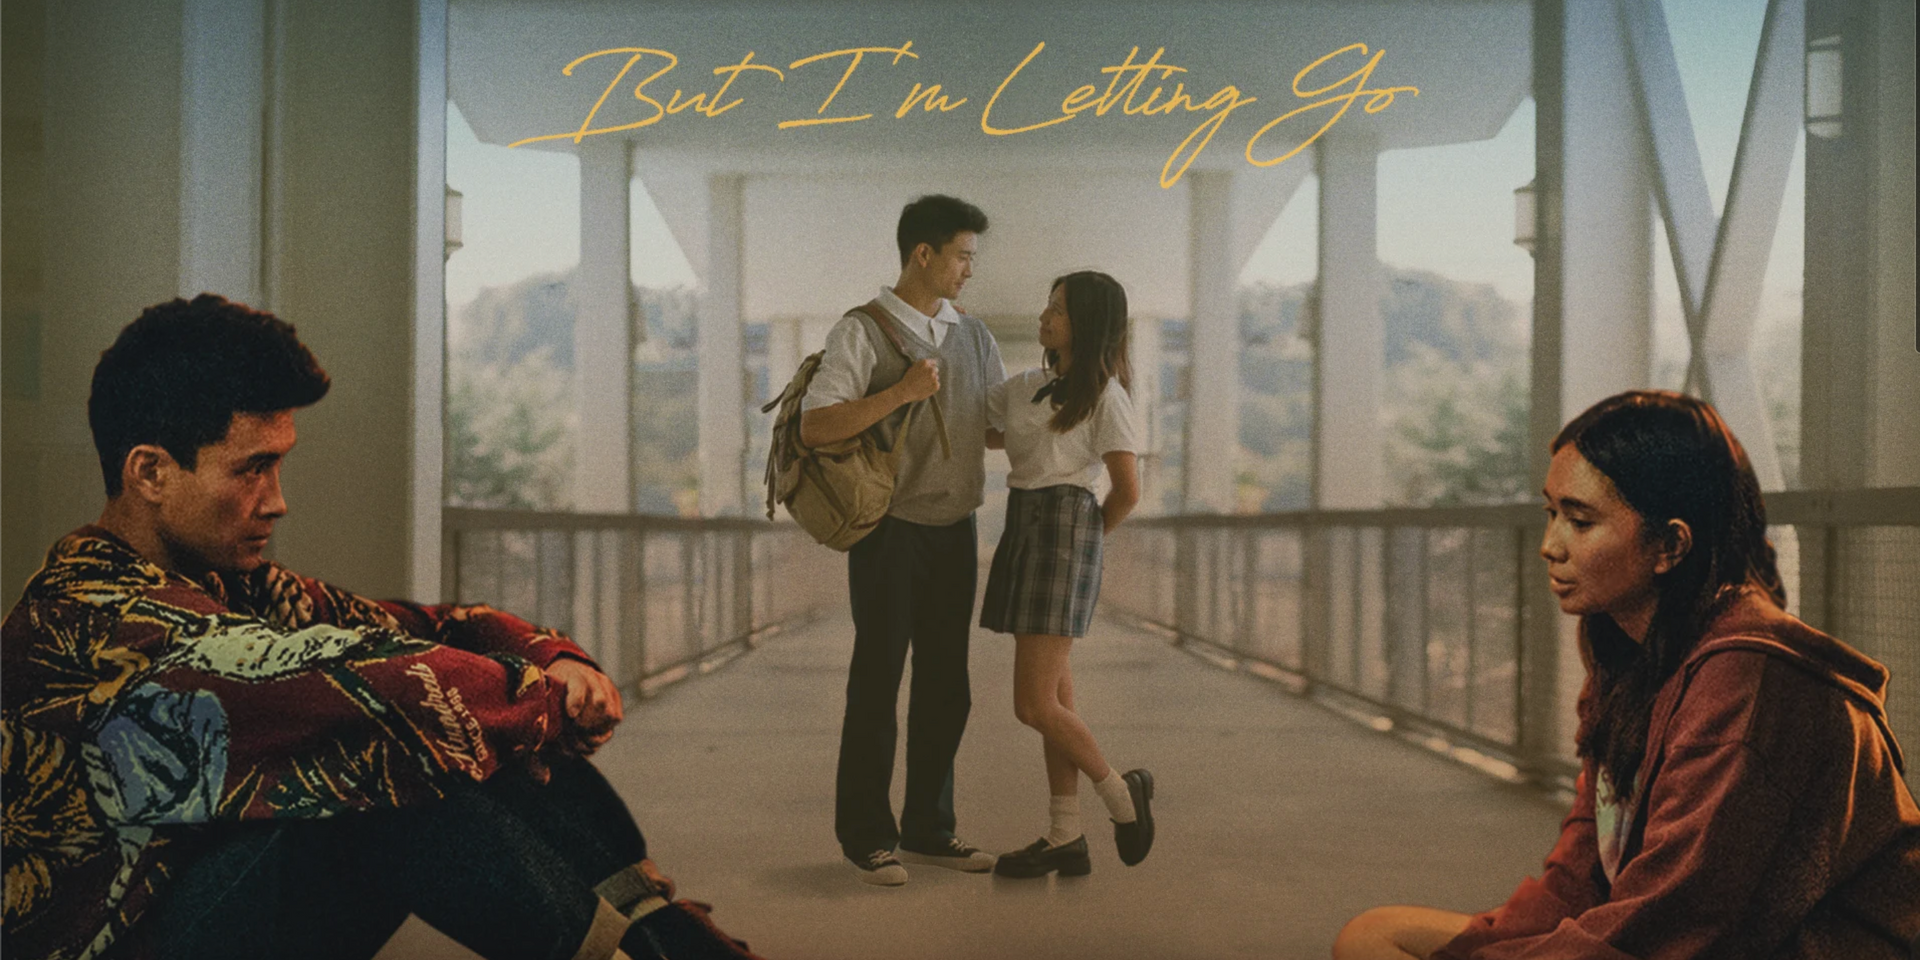 NIKI to hold limited screenings for short film, 'But I'm Letting Go' – Jakarta, Los Angeles, and New York 